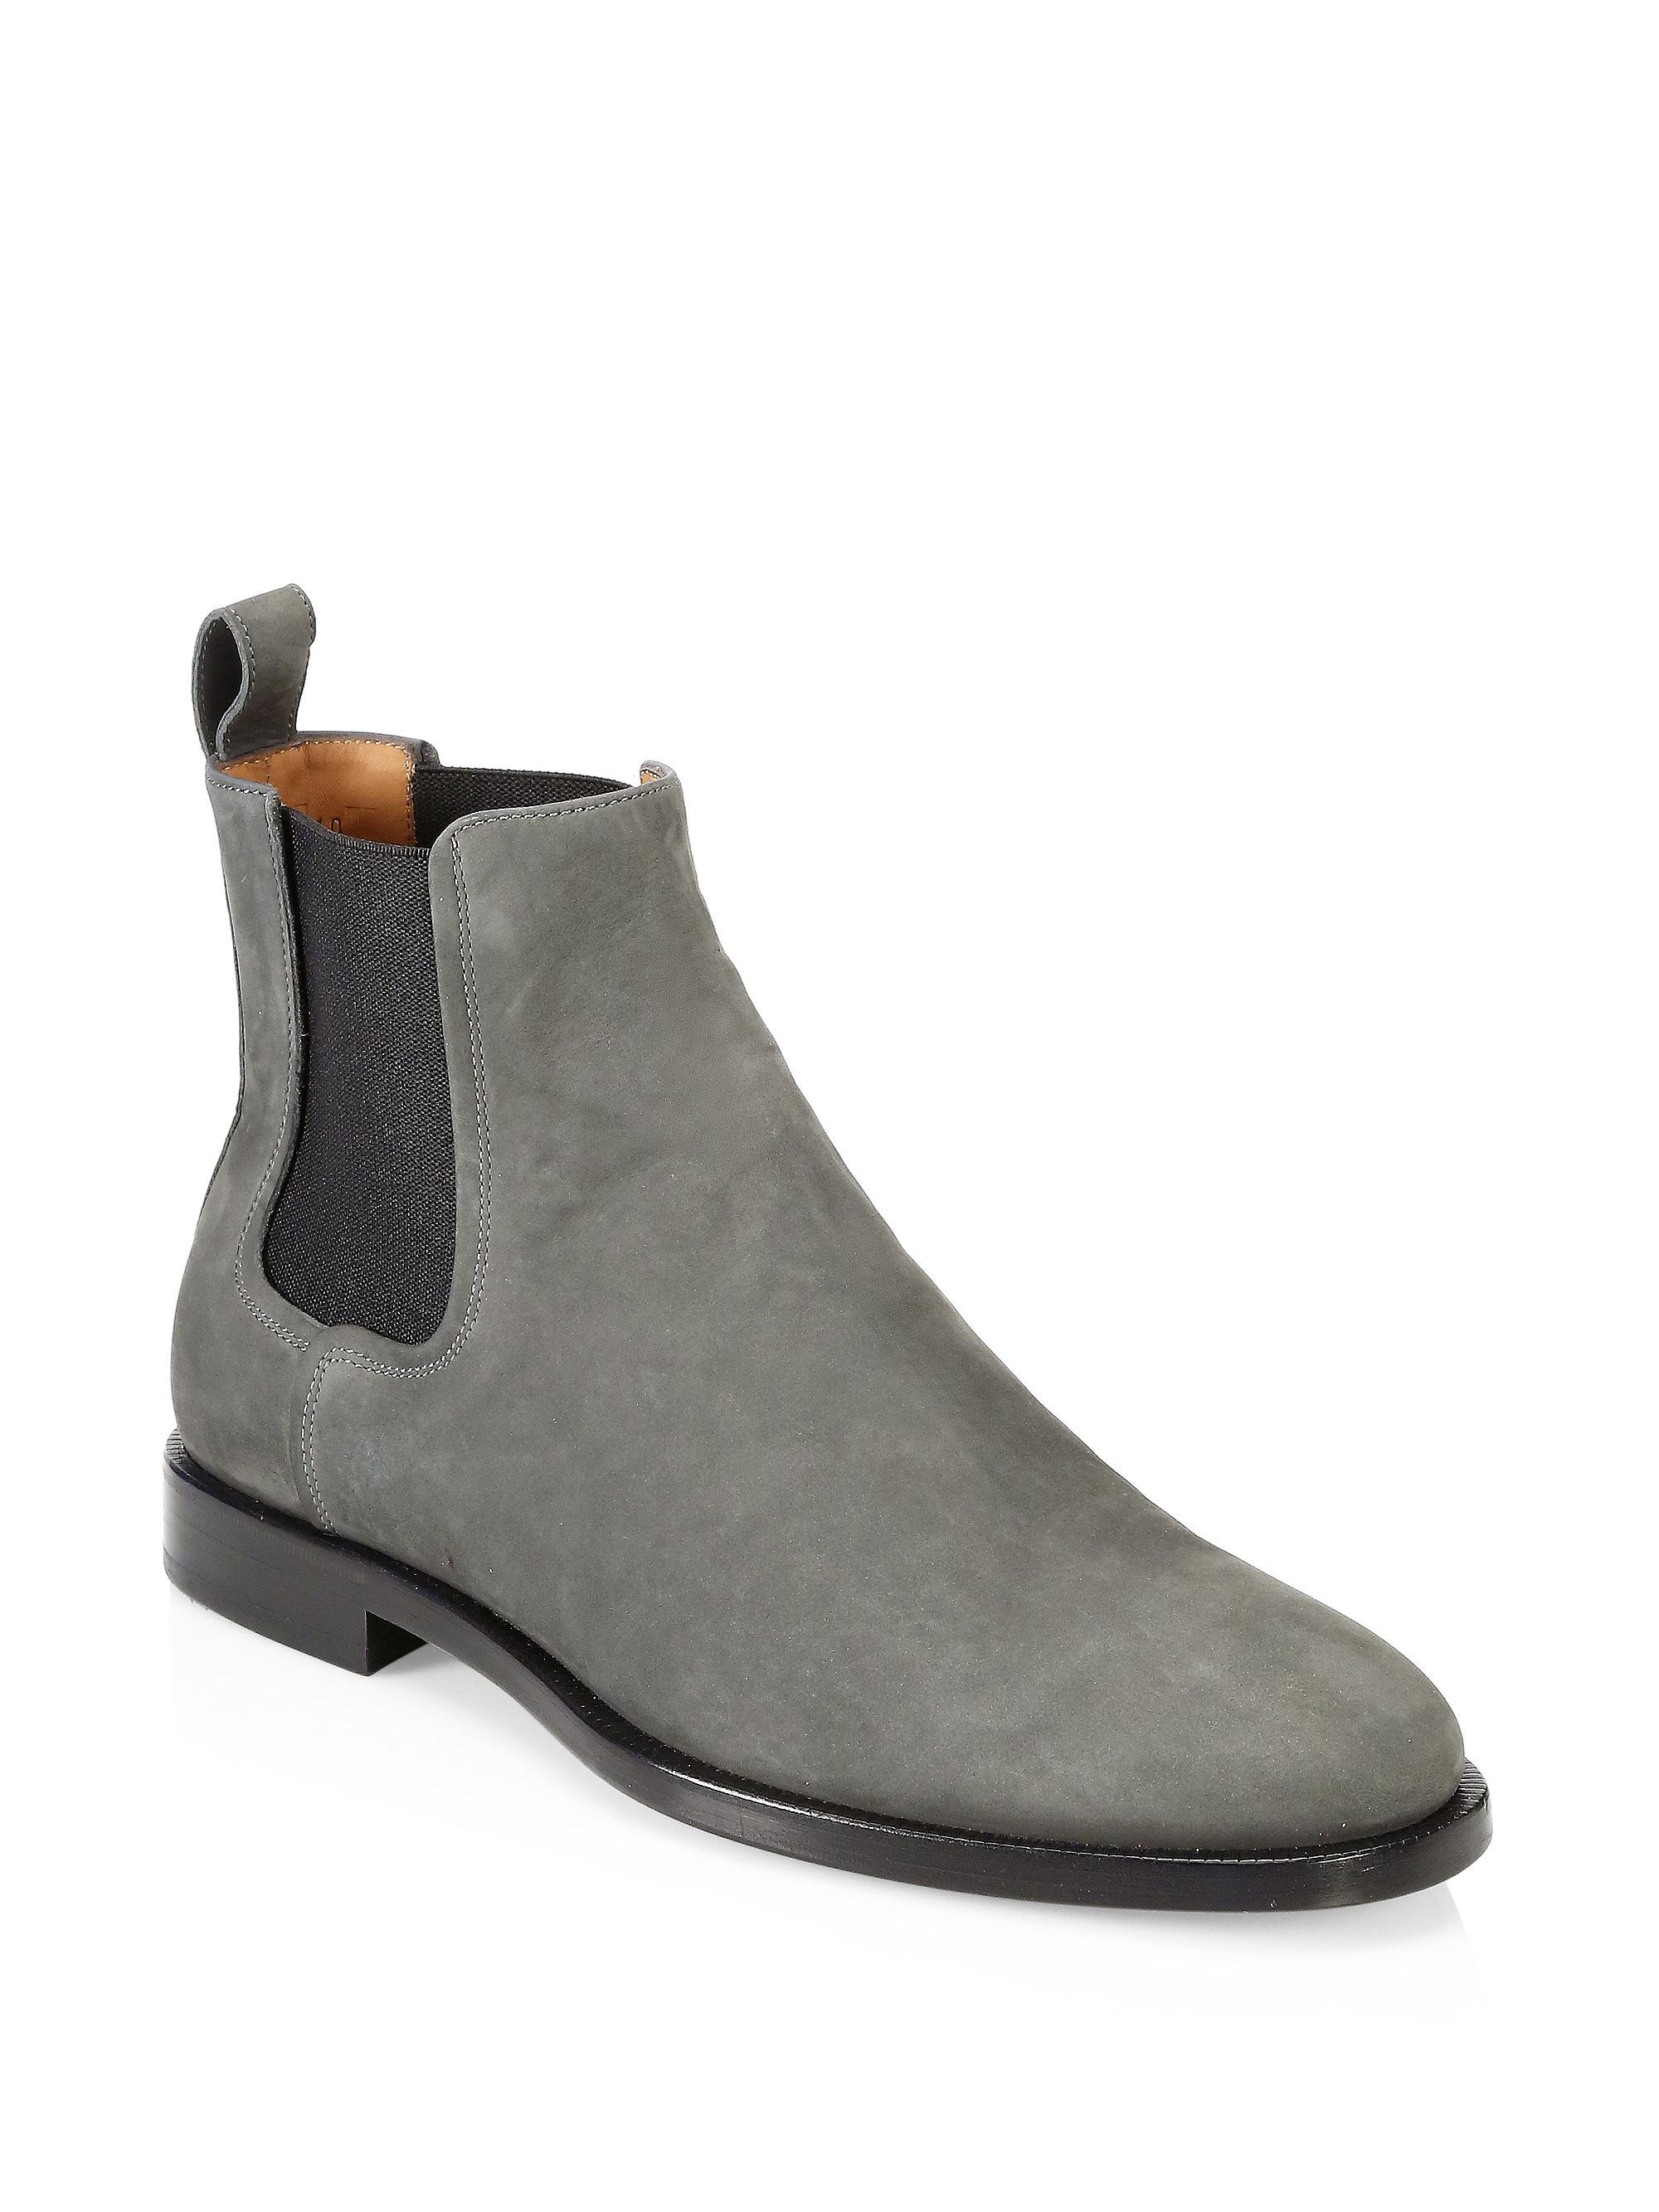 Lanvin Suede Chelsea Boots in Gray for Men - Lyst